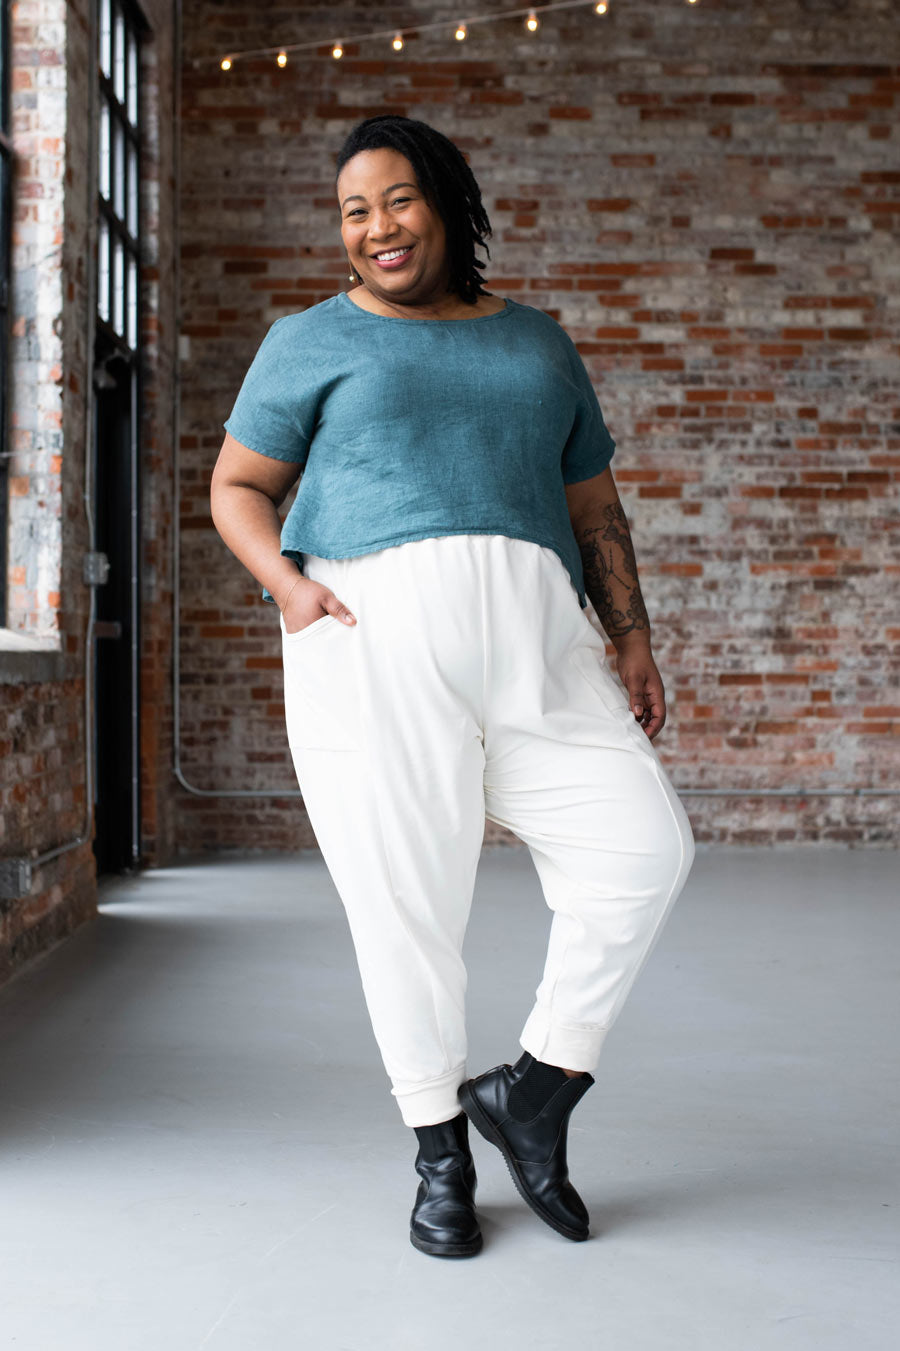 Sew Liberated - Strata Top Sewing Pattern